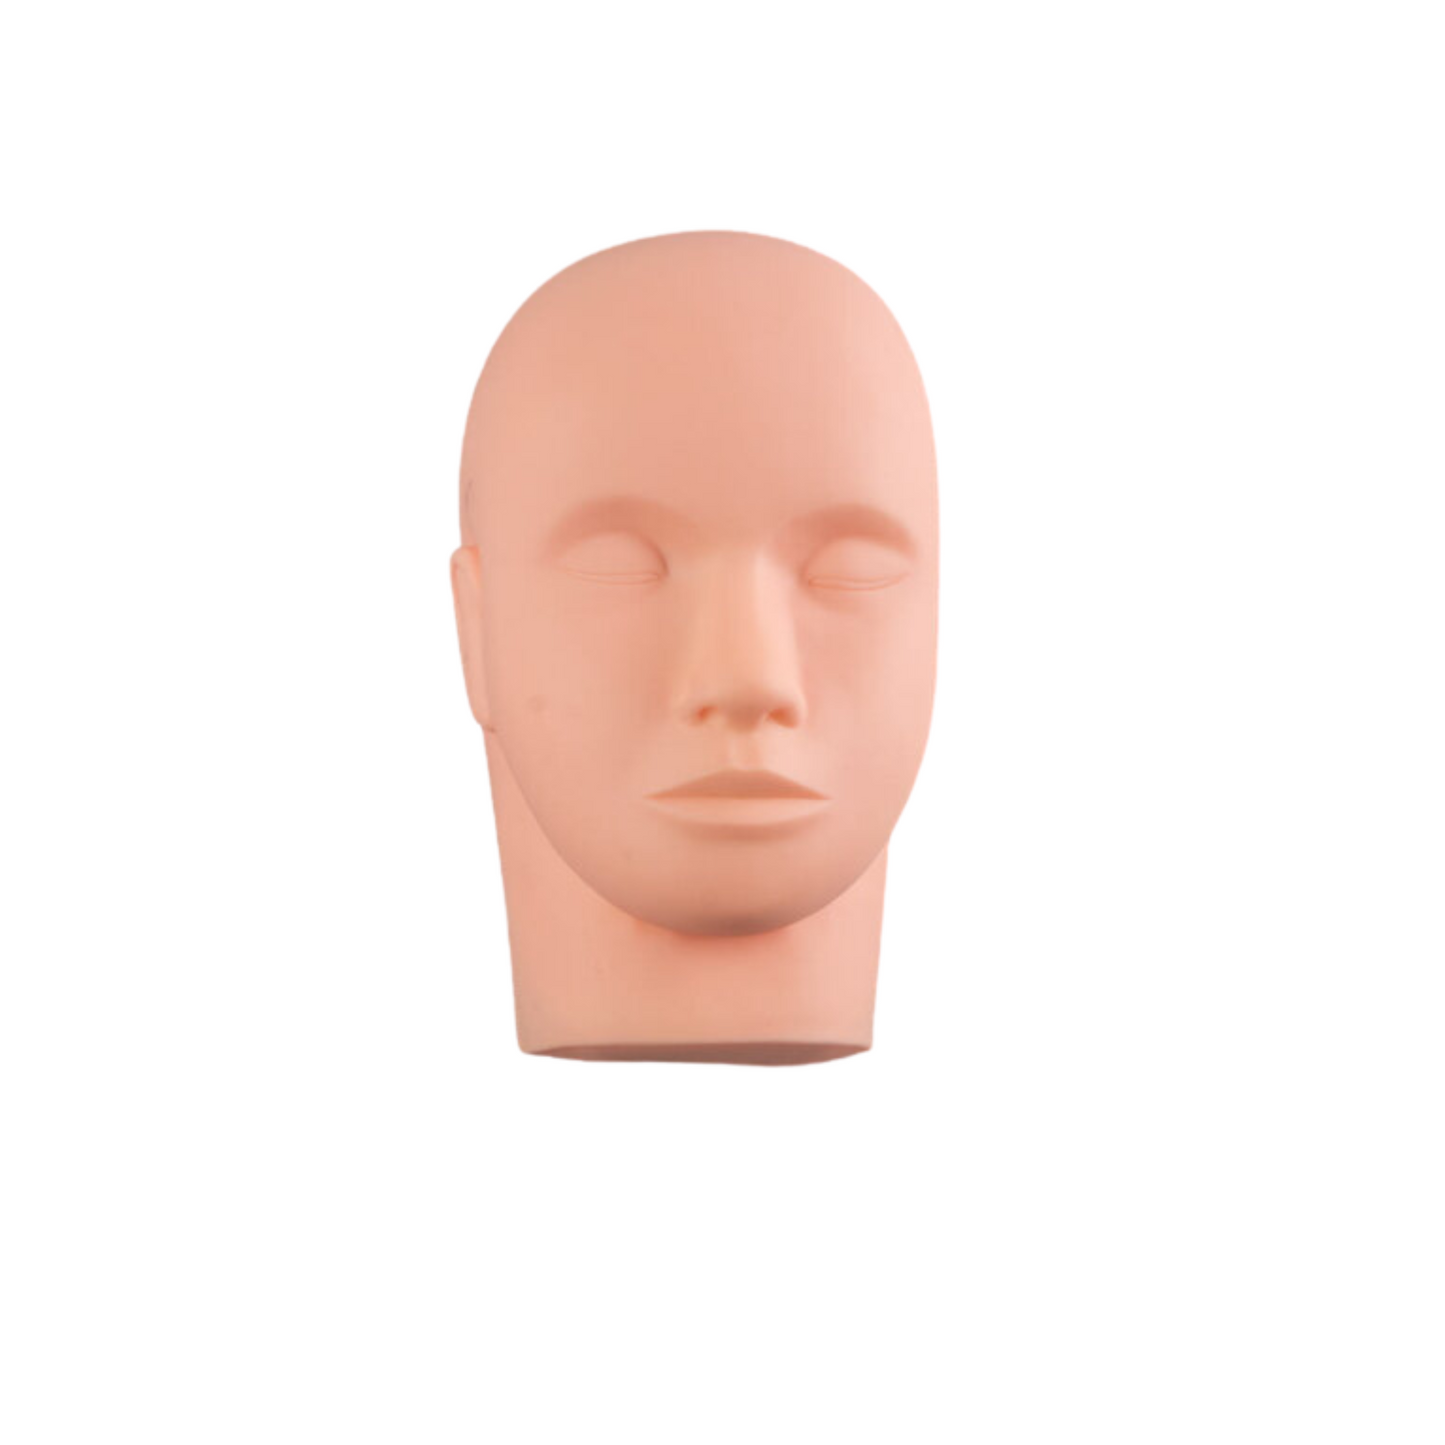 Dazzles soft-touch rubber practice mannequin heads